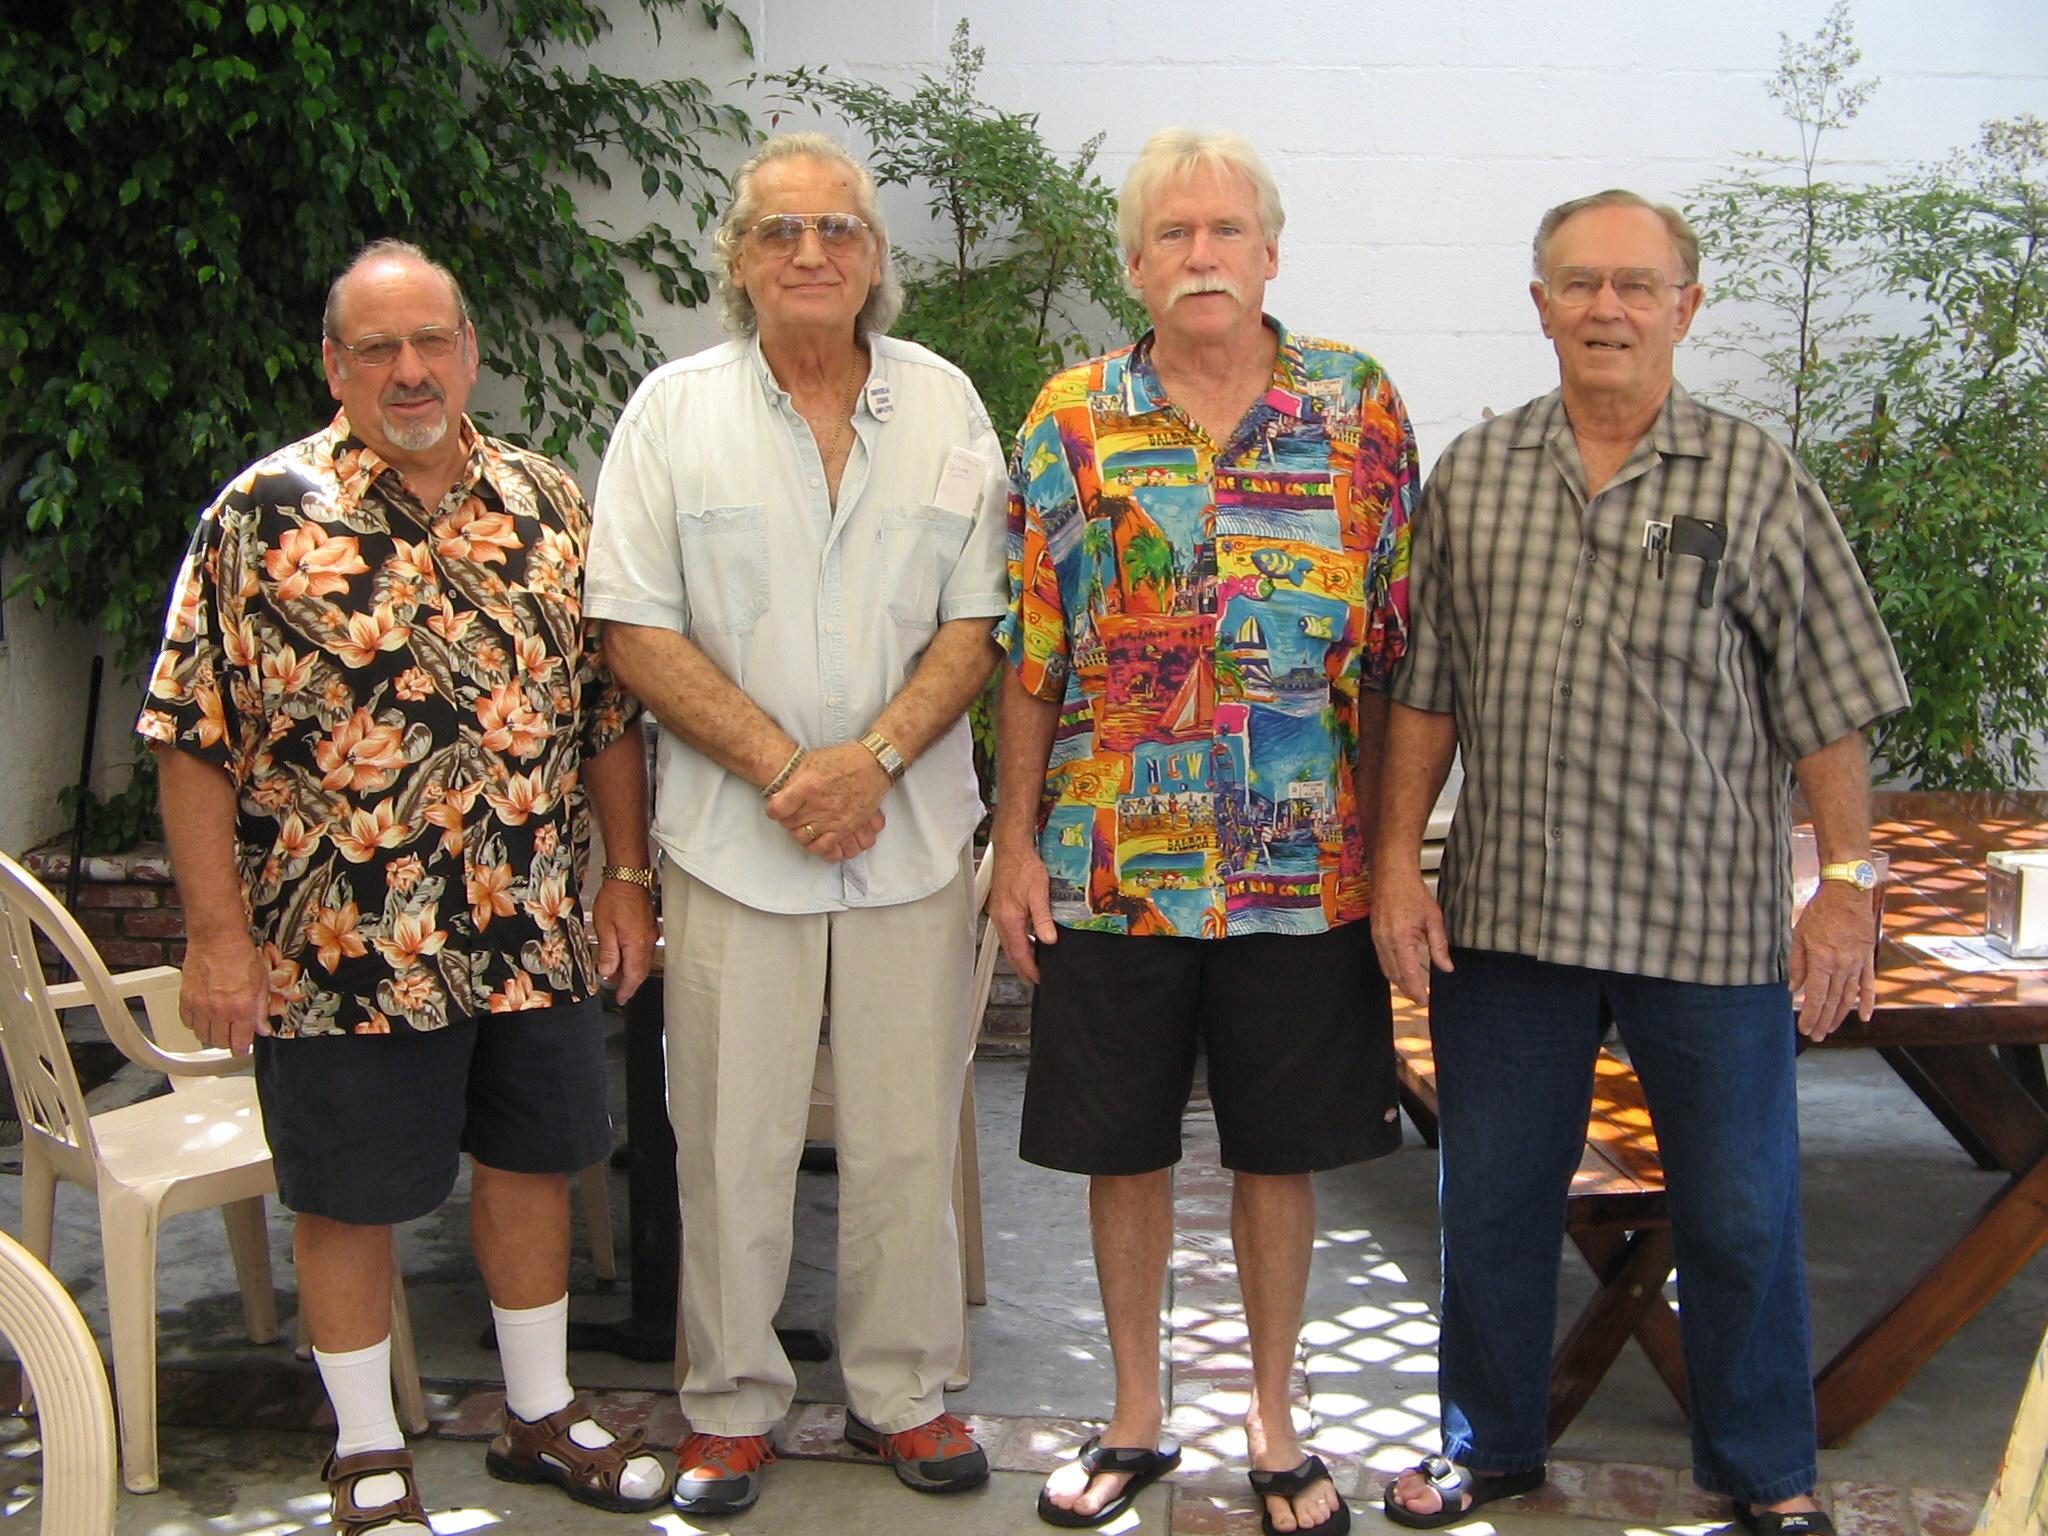 Earl Williman, Frank Sontag, Gary Tandrow, Don Dahlquist (Photo by Karen Weilacher)